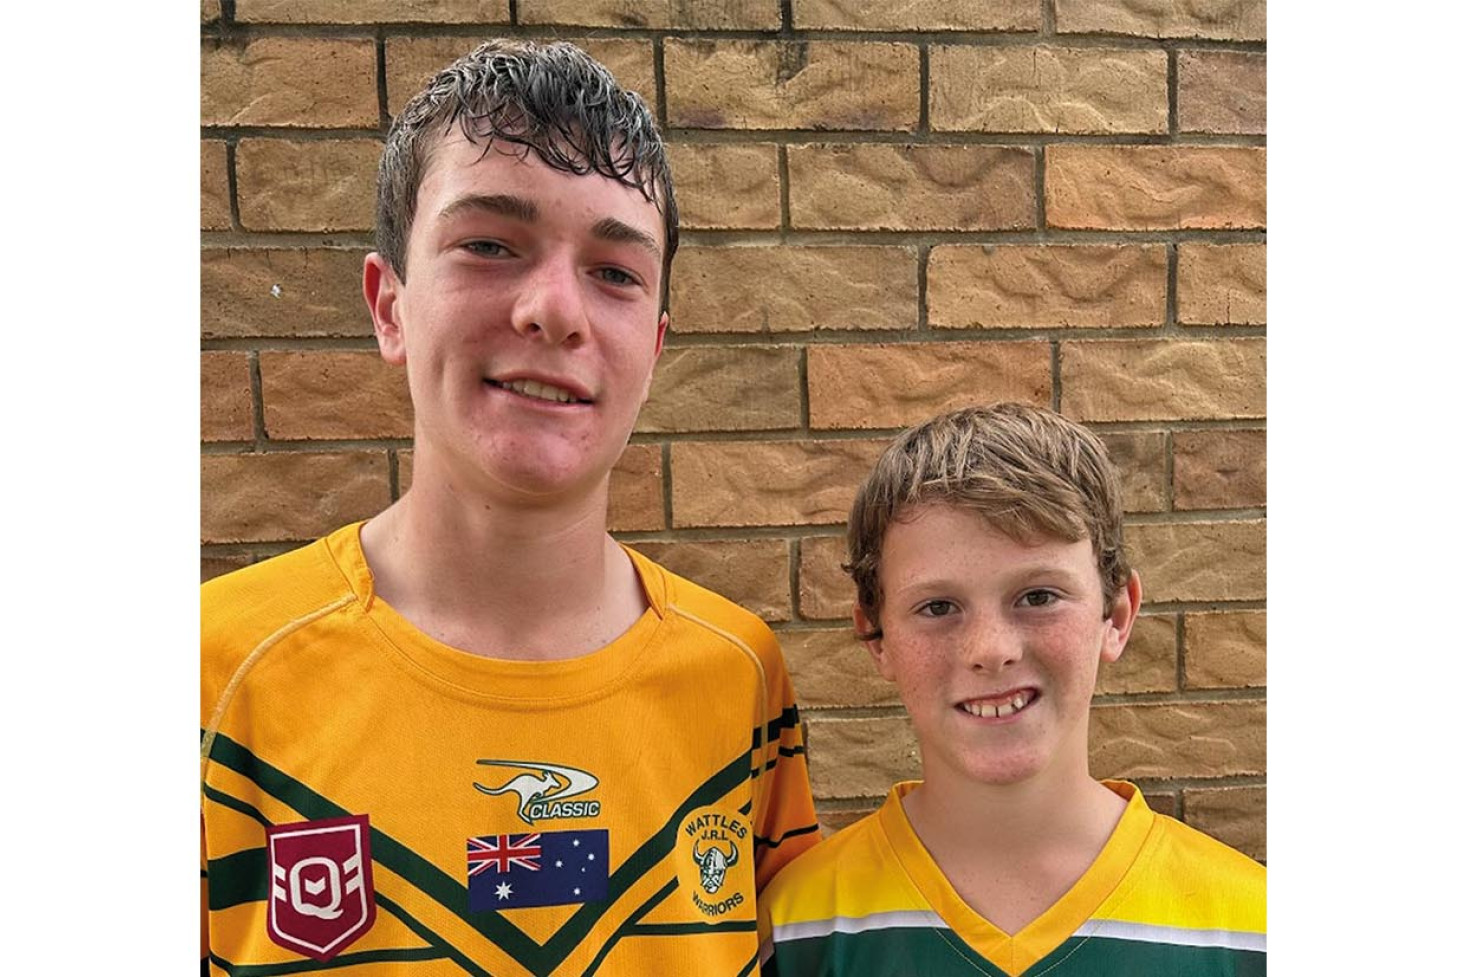 Wattles Junior Rugby League Club players Jack Burton (left) and Rhys Gascoyne recently gained selection in Darling Downs Schoolboy representative teams. (Image – Aaron Gilmore)